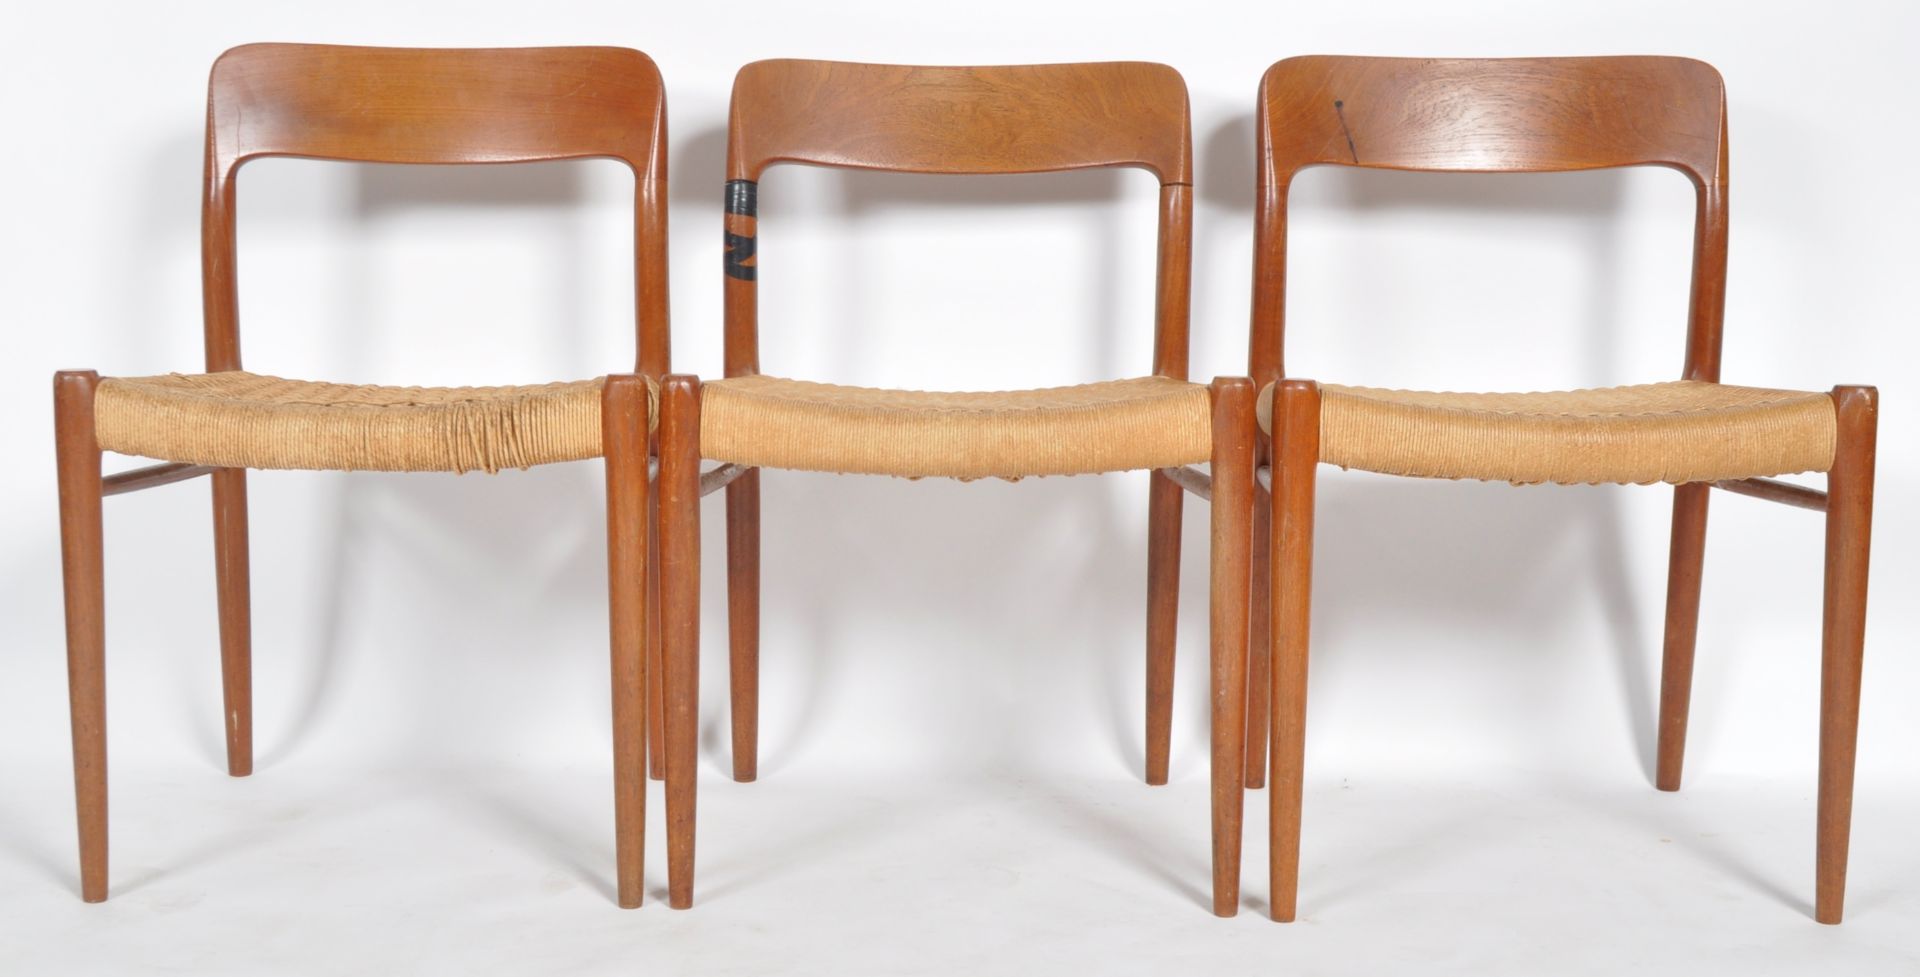 NIELS MOLLER FOR JL MOLLER - MODEL 75 - FOUR DINING CHAIRS